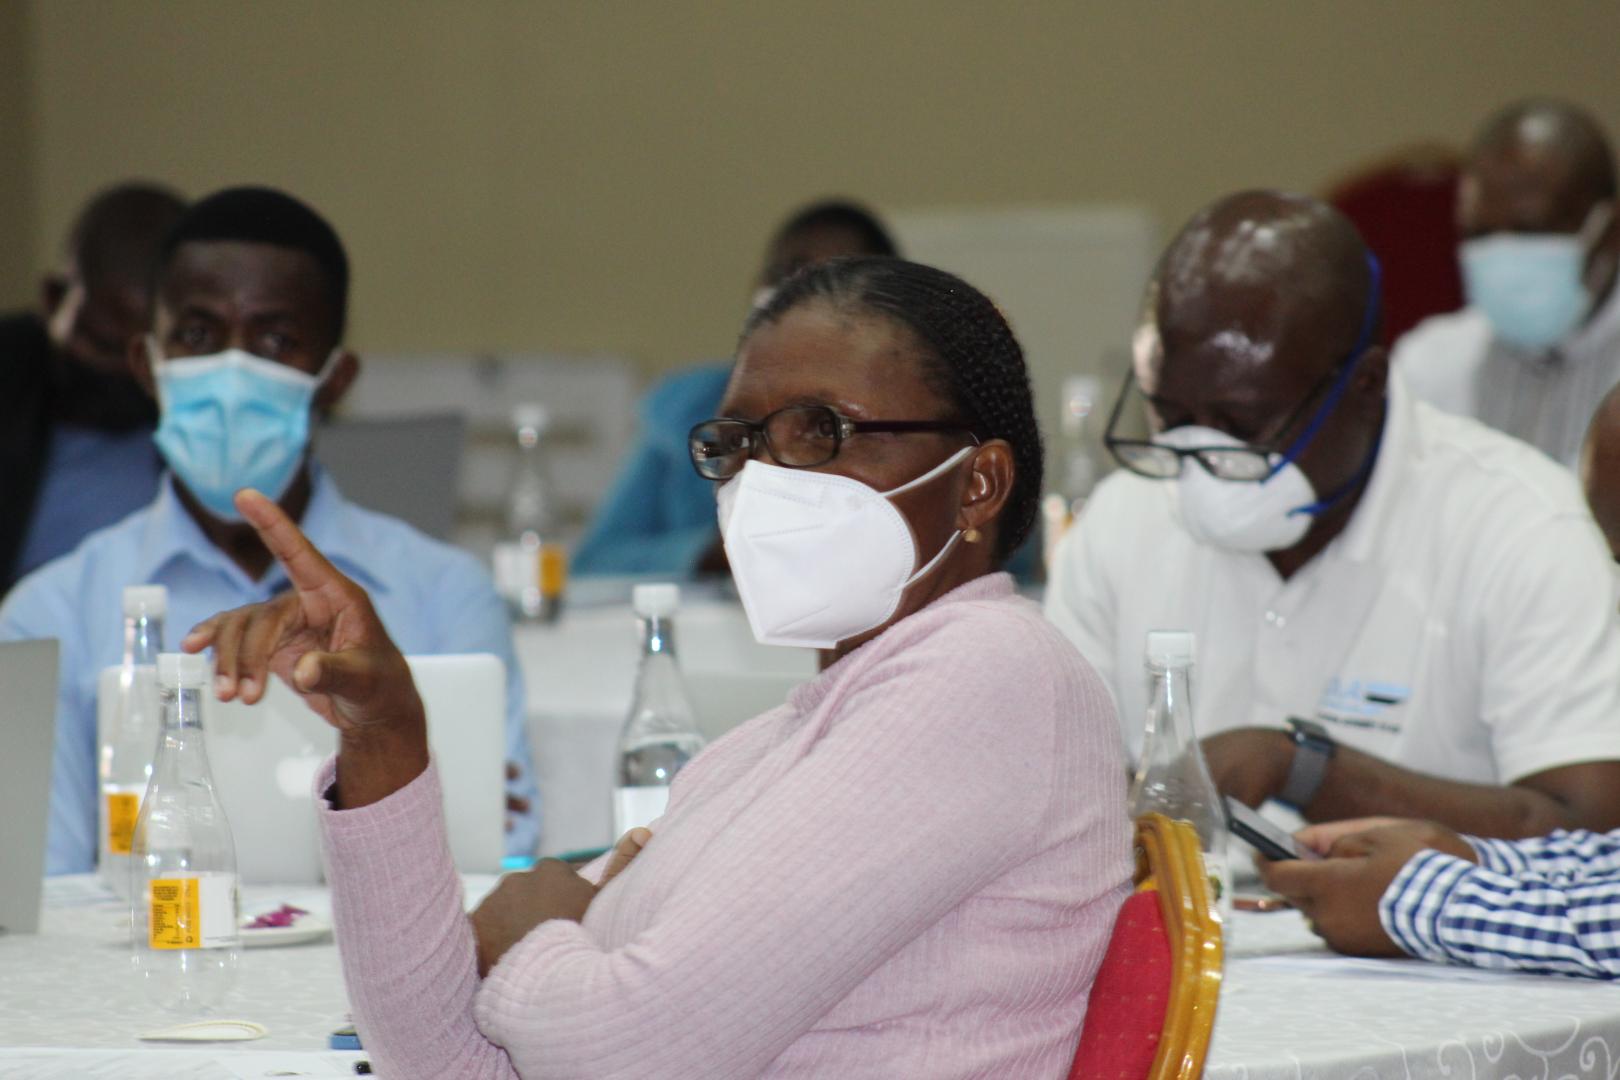 Ms Nametso Mosweu (center) a nurse at Sir Seretse Following the first port health stakeholders meeting which was held on the 23rd of September 2021 in Gaborone, the Ministry of Health and Wellness (MoHW) with support from the World Health Organization (WHO) Country Office hosted a 5-day Port Health Strategic Plan development workshop which took place from the 4th to 8th of October 2021 in Lobatse.  The objectives of the workshop were to develop the Port Health StrKhama International Airport Emergency Clinic